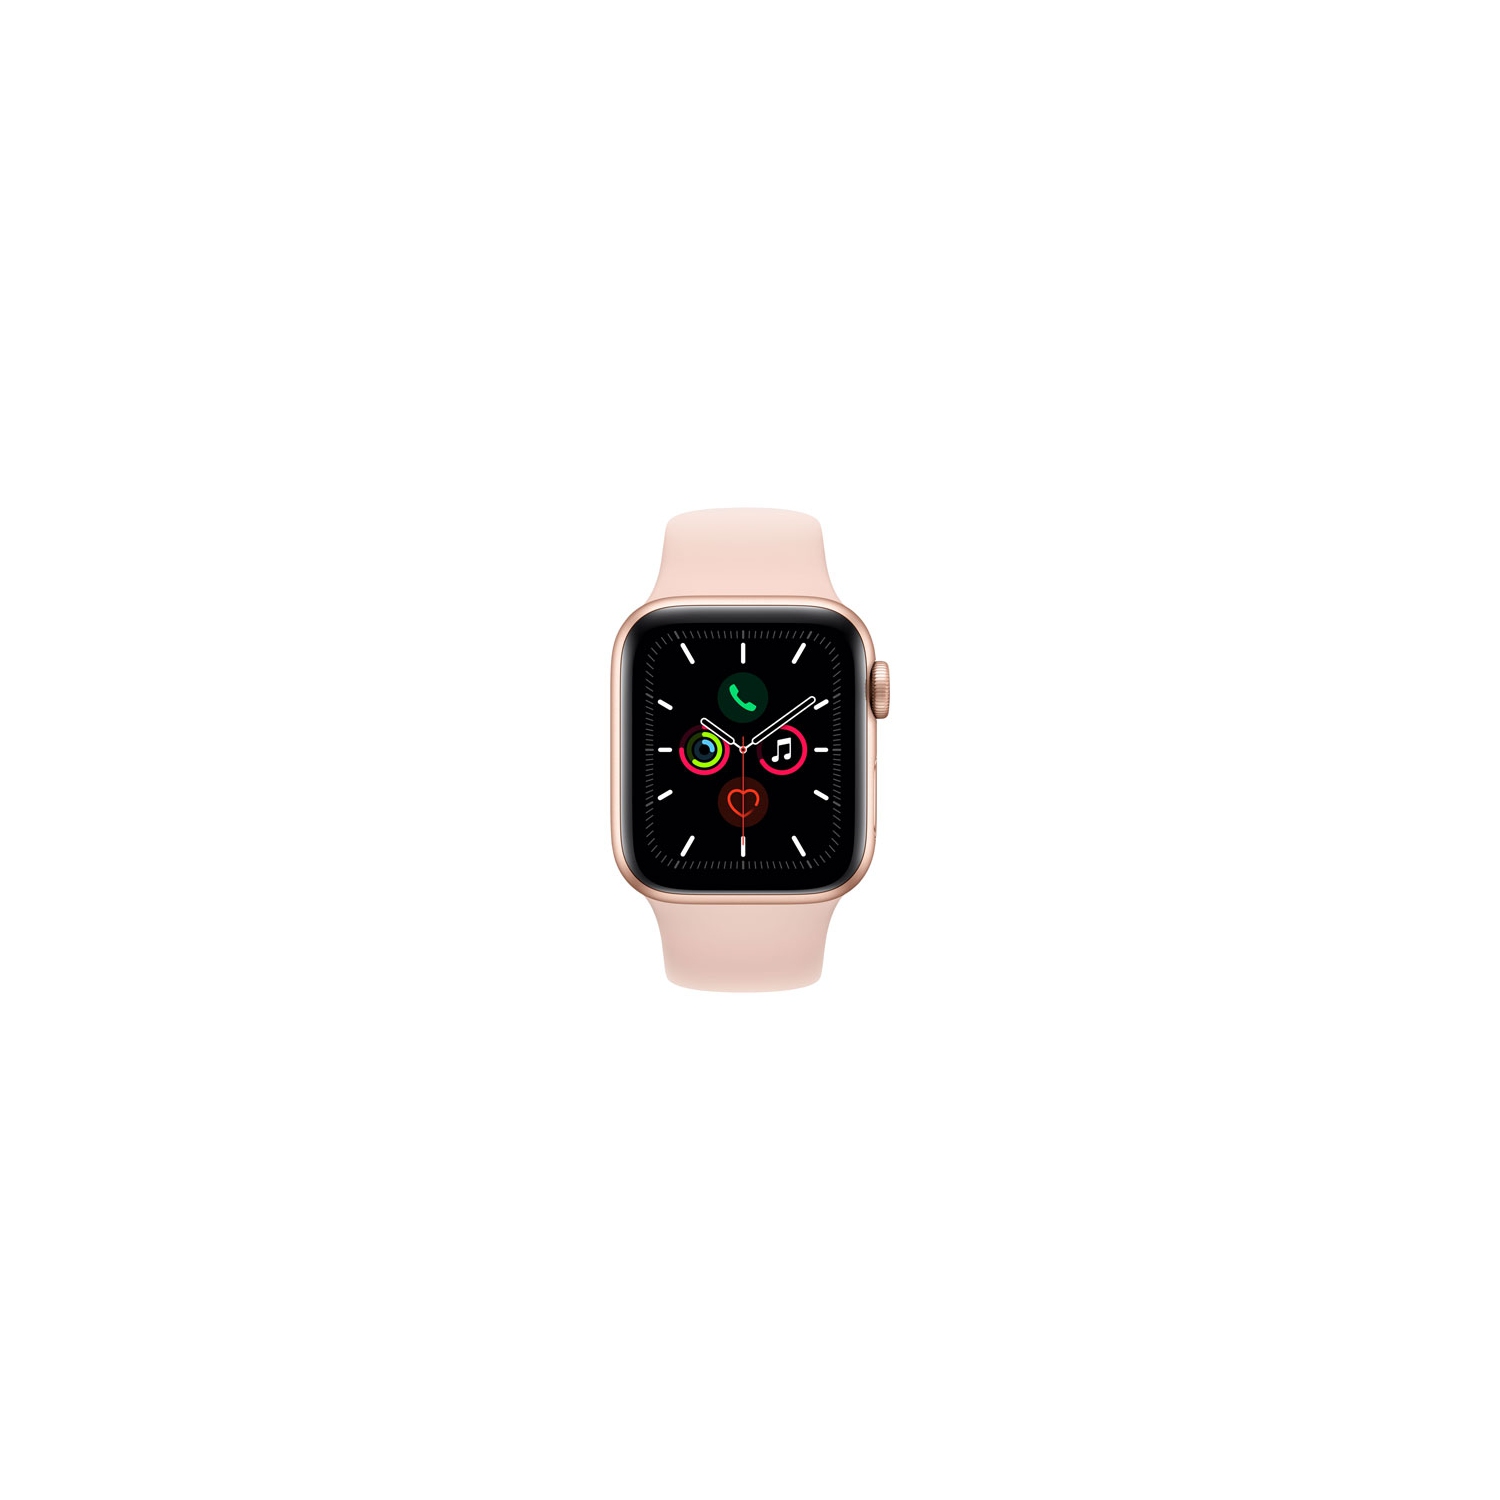 Refurbished (Good) - Apple Watch Series 5 (GPS) 40mm Gold Aluminium Case with Pink Sand Sport Band